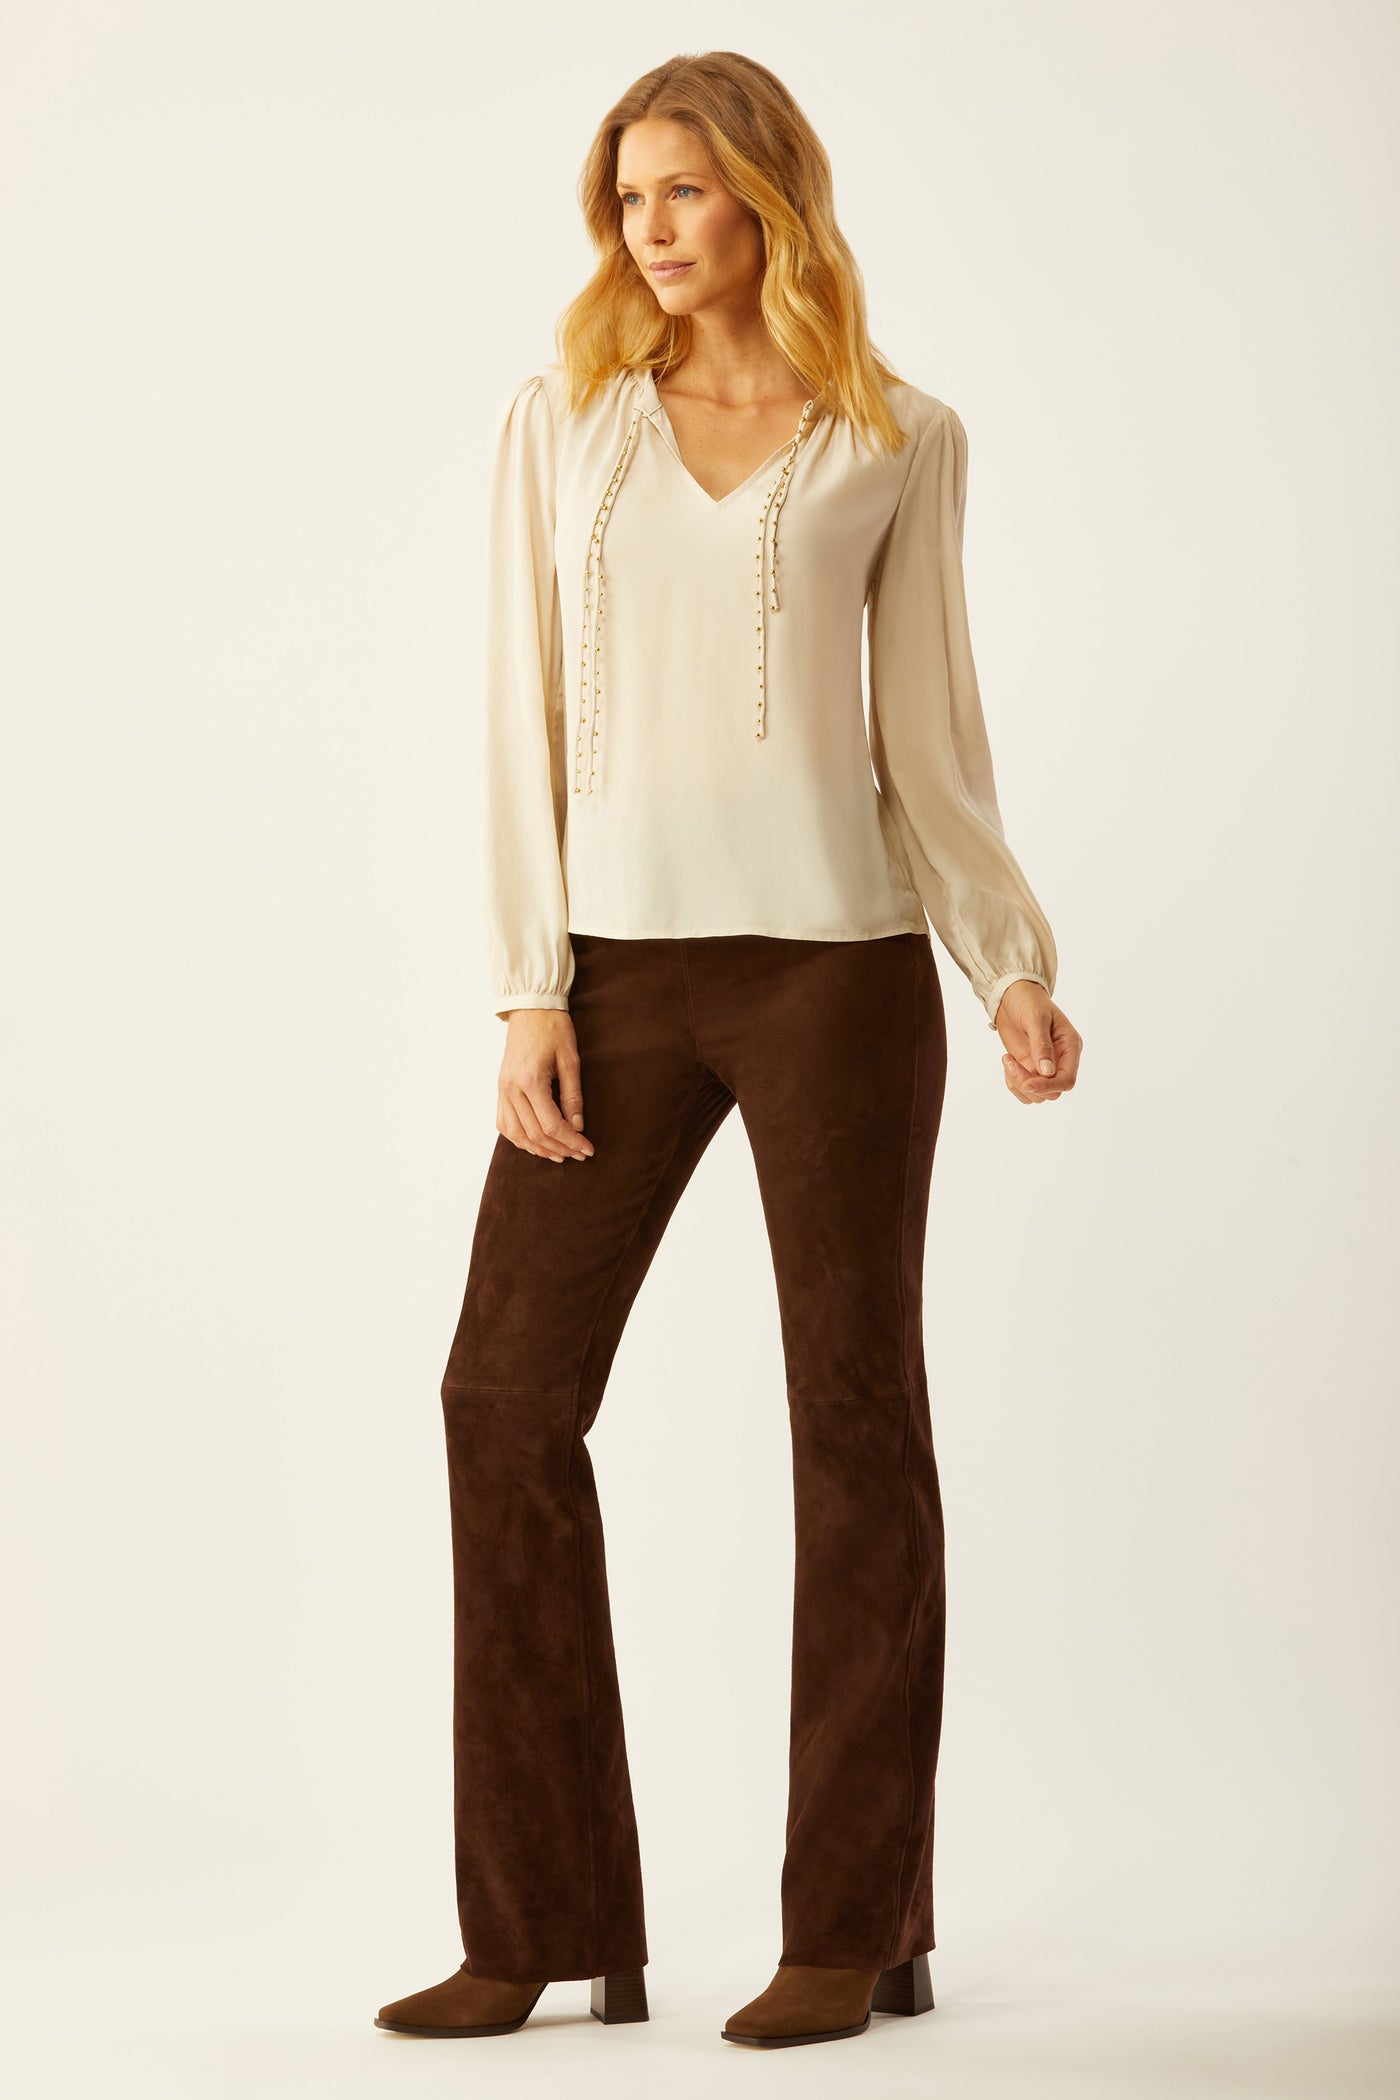 Stretch Suede Bootcut Pant - Chocolate